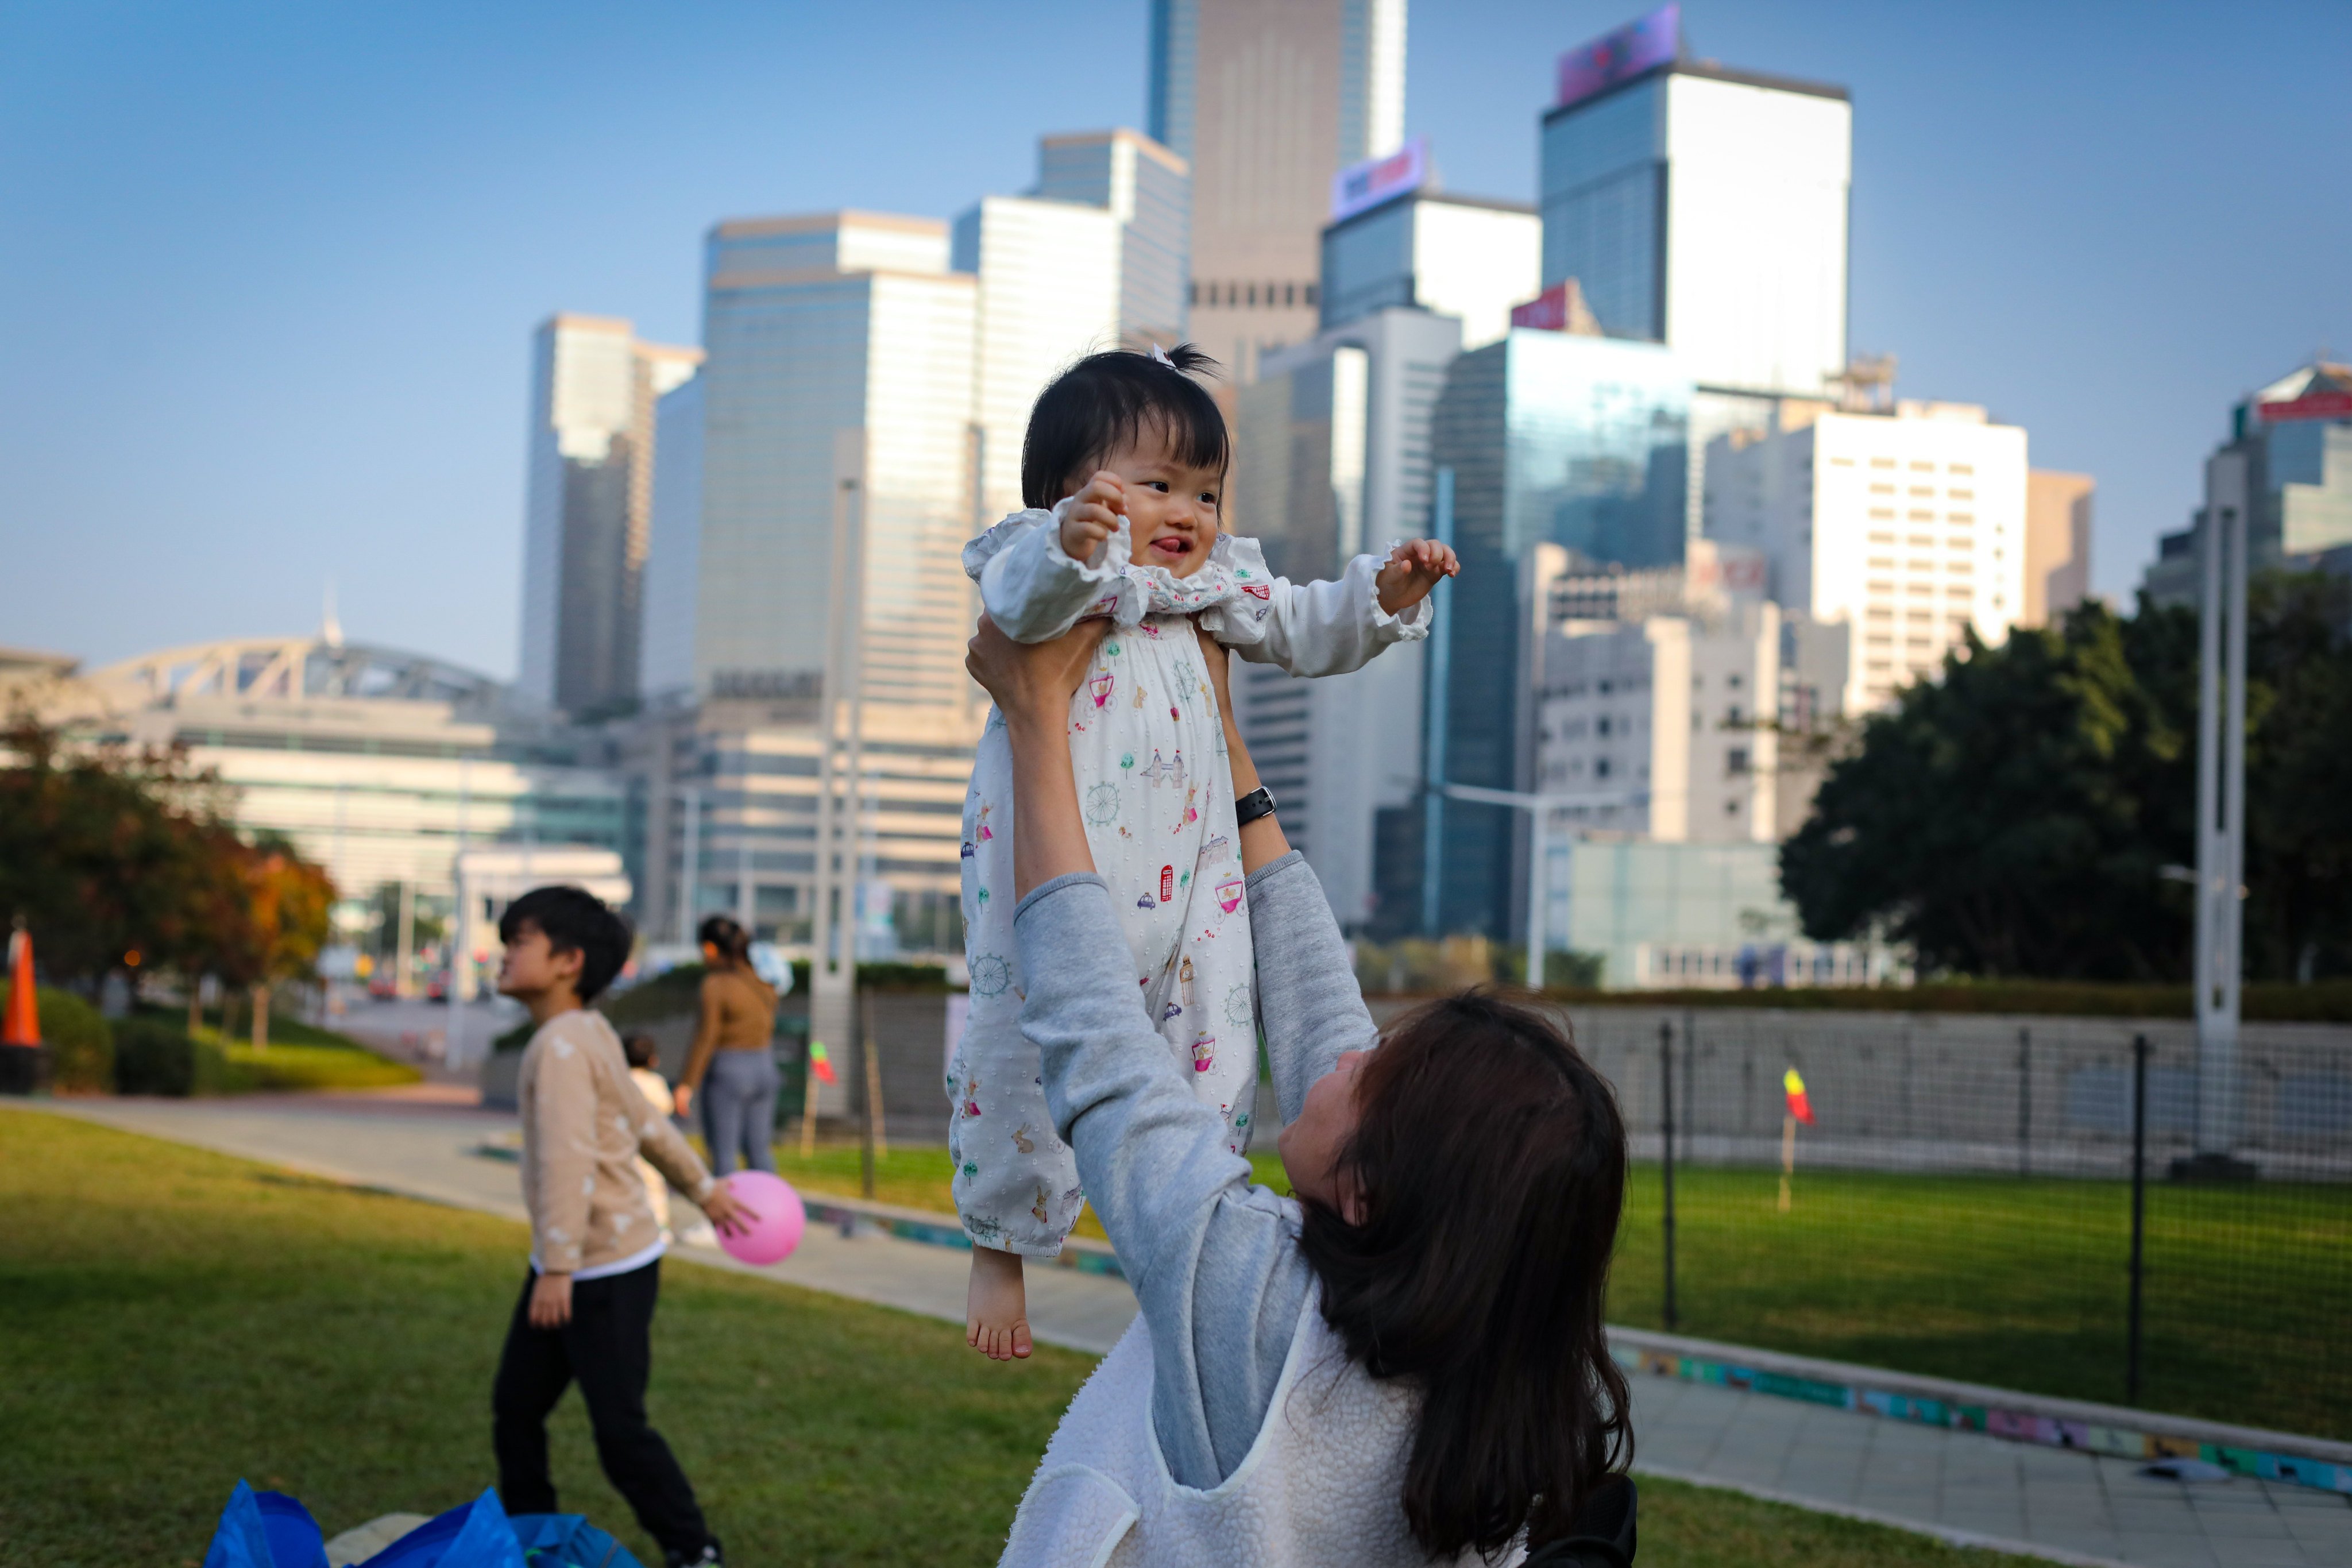 Social service NGOs and lawmakers say the level of childcare support available in Hong Kong is crucial to encouraging more women to remain in the workforce. Photo: Xiaomei Chen